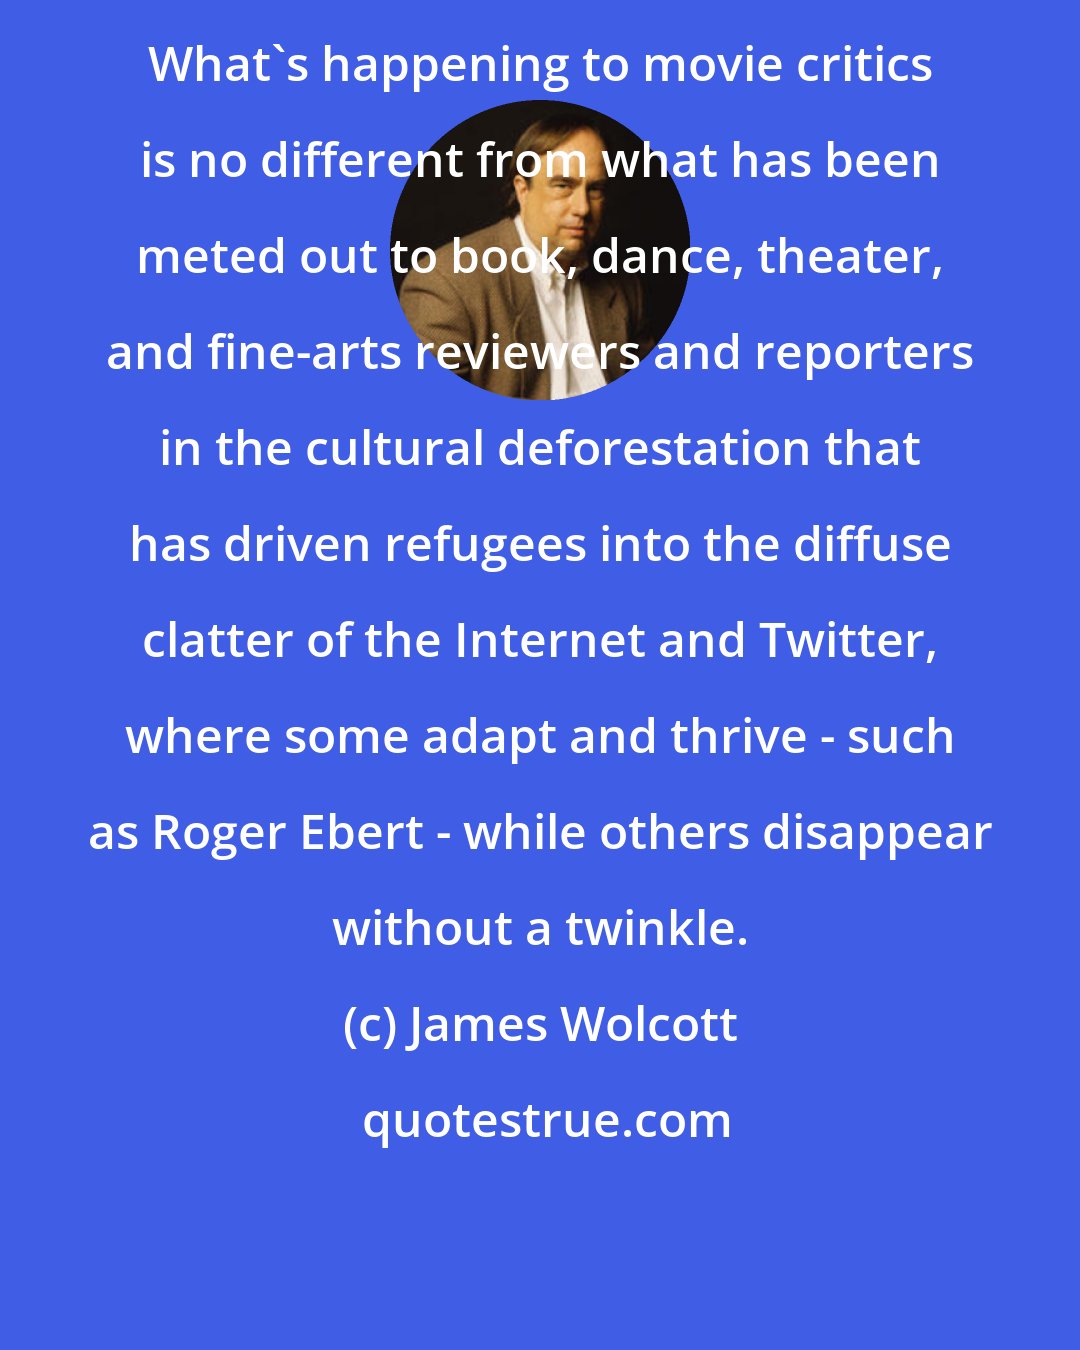 James Wolcott: What's happening to movie critics is no different from what has been meted out to book, dance, theater, and fine-arts reviewers and reporters in the cultural deforestation that has driven refugees into the diffuse clatter of the Internet and Twitter, where some adapt and thrive - such as Roger Ebert - while others disappear without a twinkle.